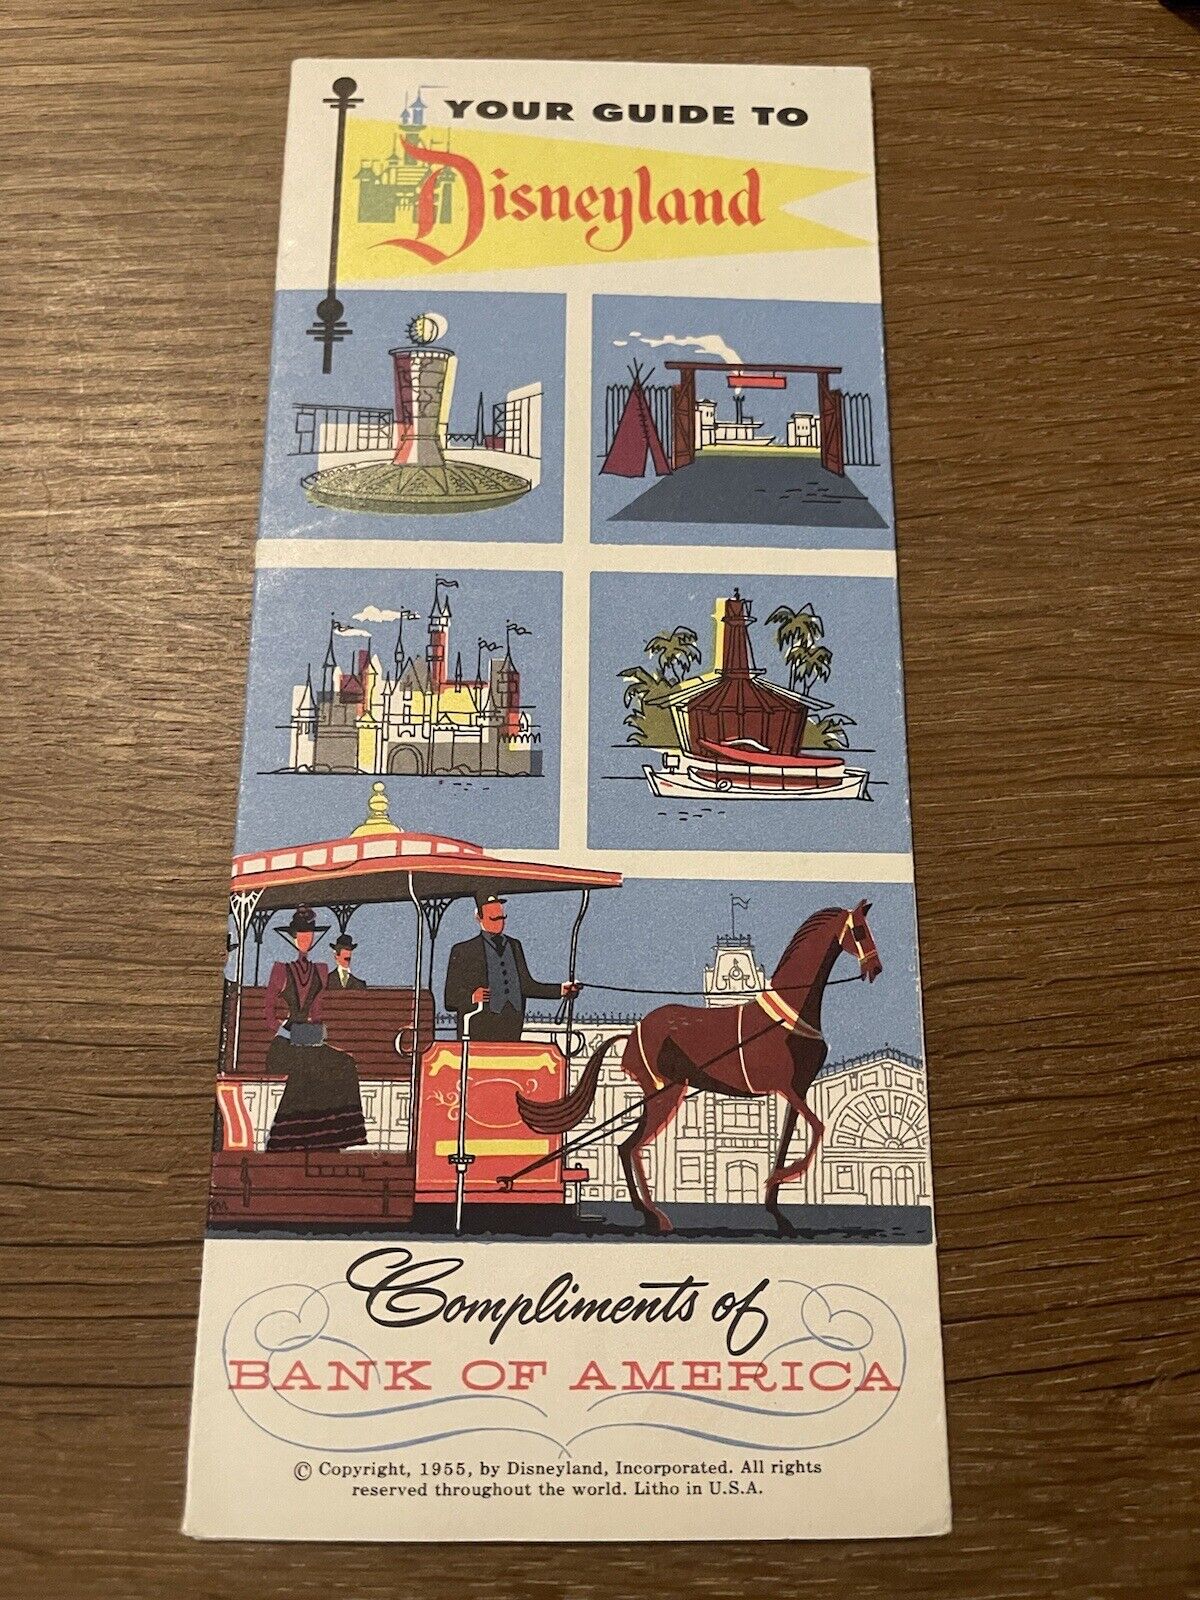 Vintage 1955 YOUR GUIDE TO DISNEYLAND Fold Out Brochure/Map BANK OF AMERICA